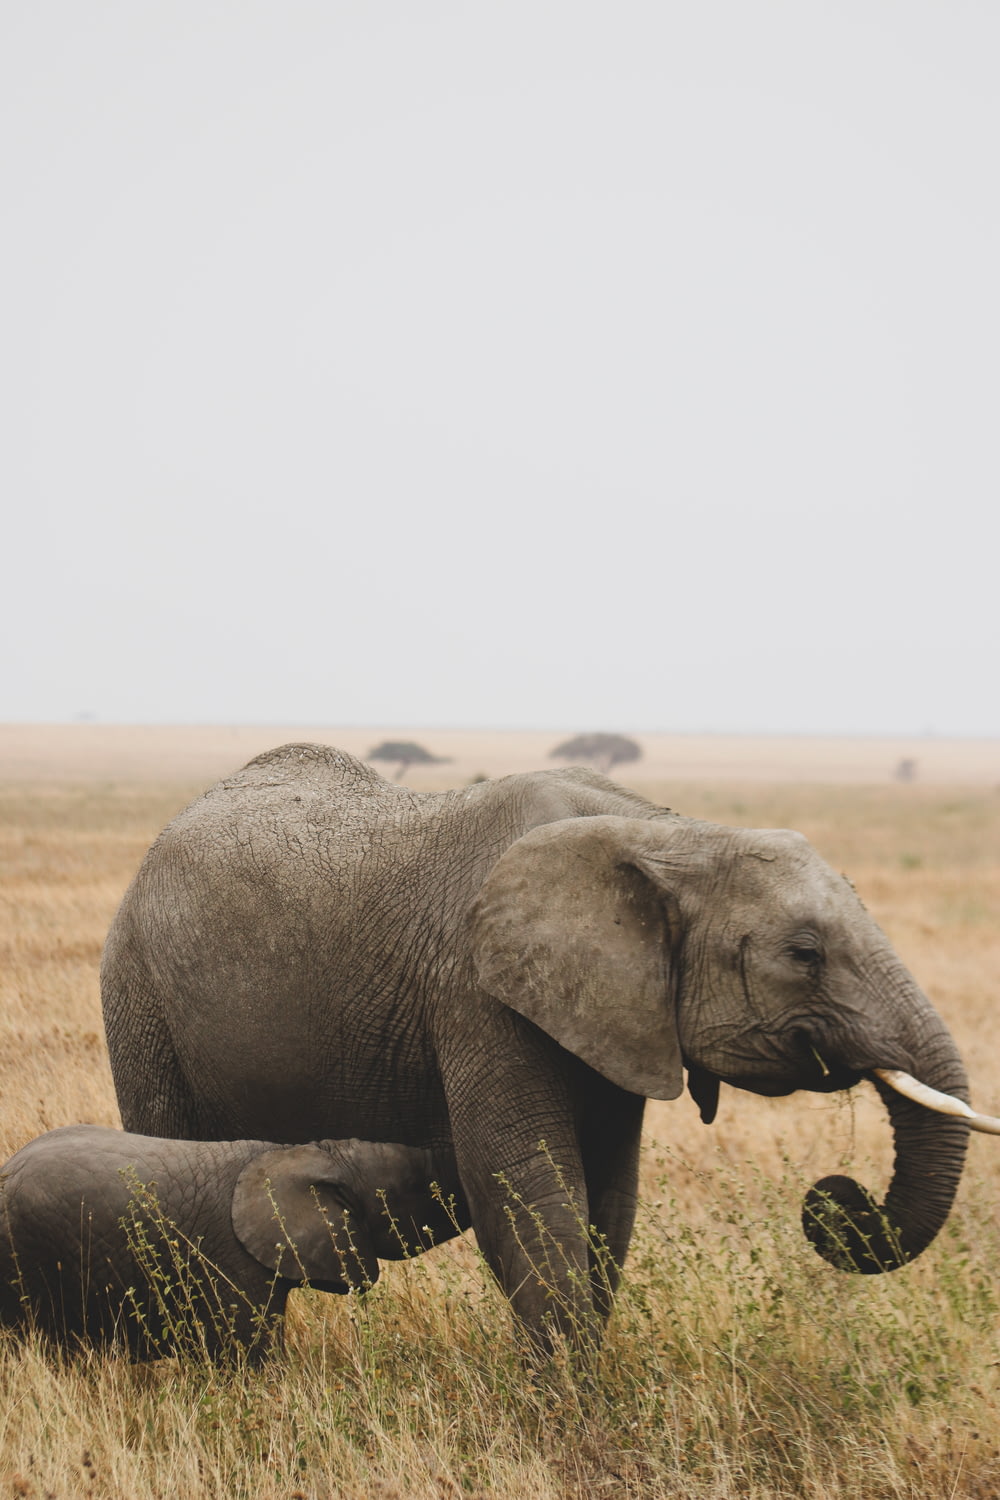 a large elephant standing next to a baby elephant